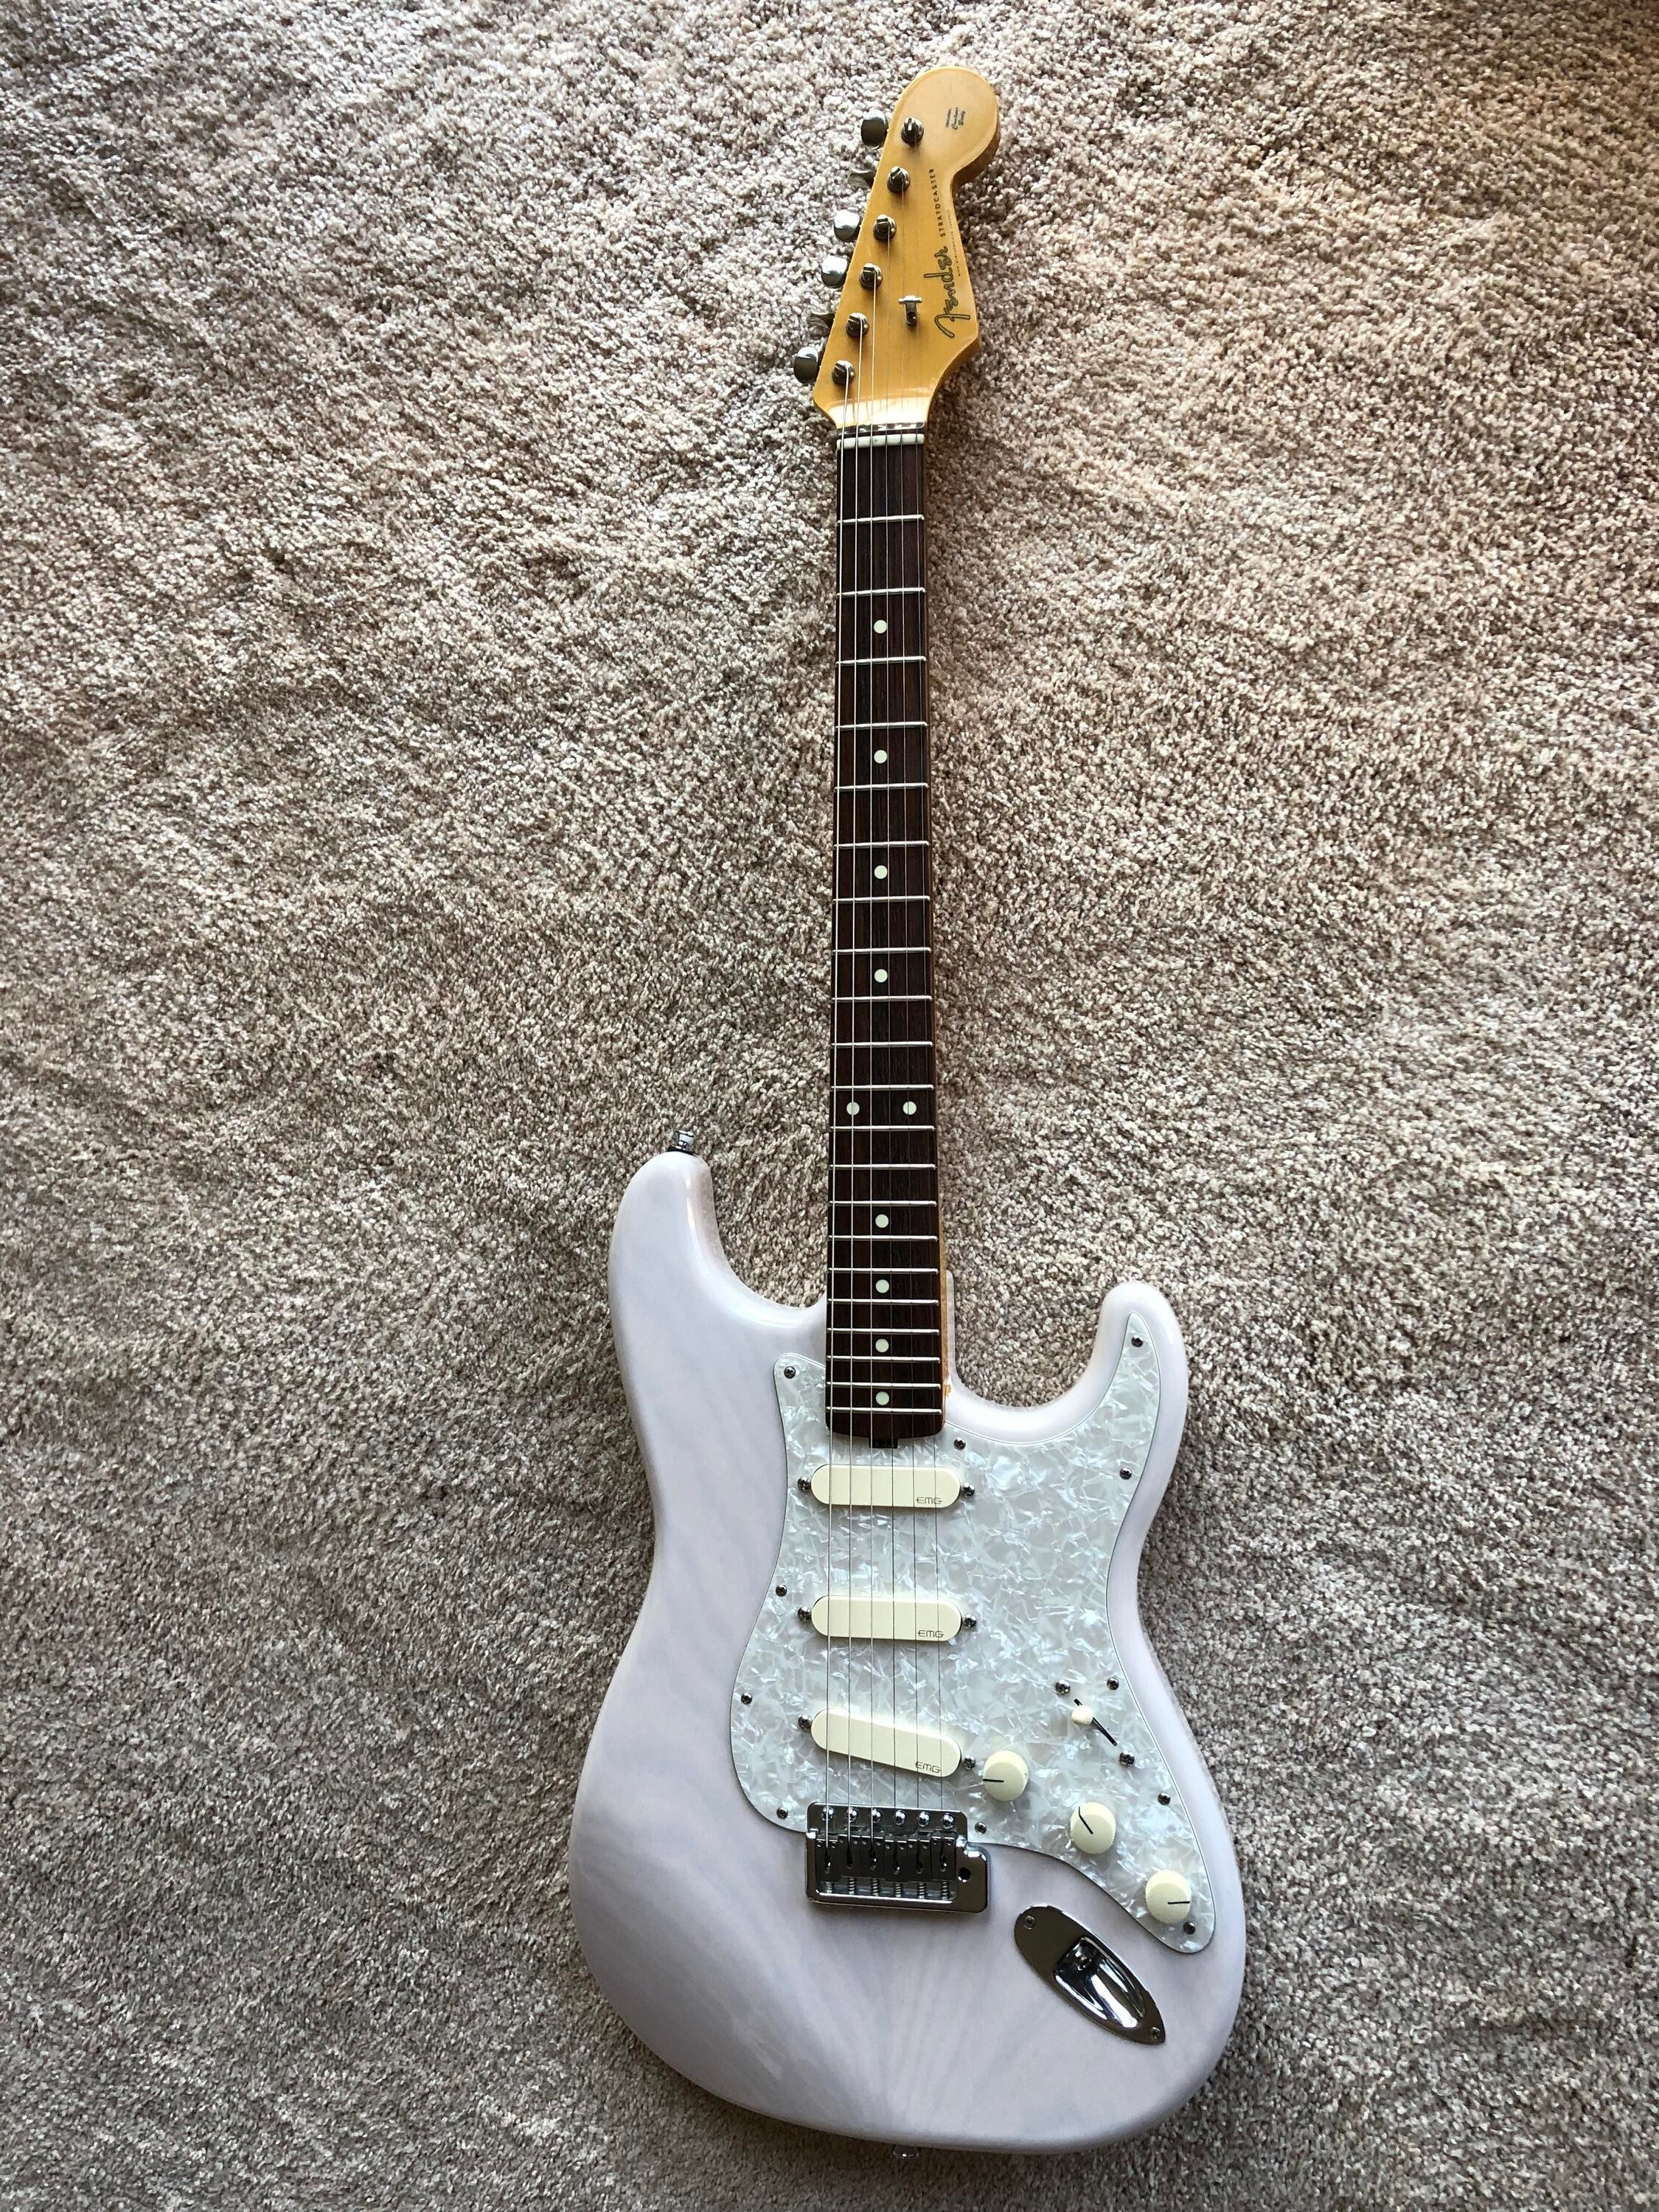 Used Fender Stratocaster Crafted in Japan 1998 with EMG David